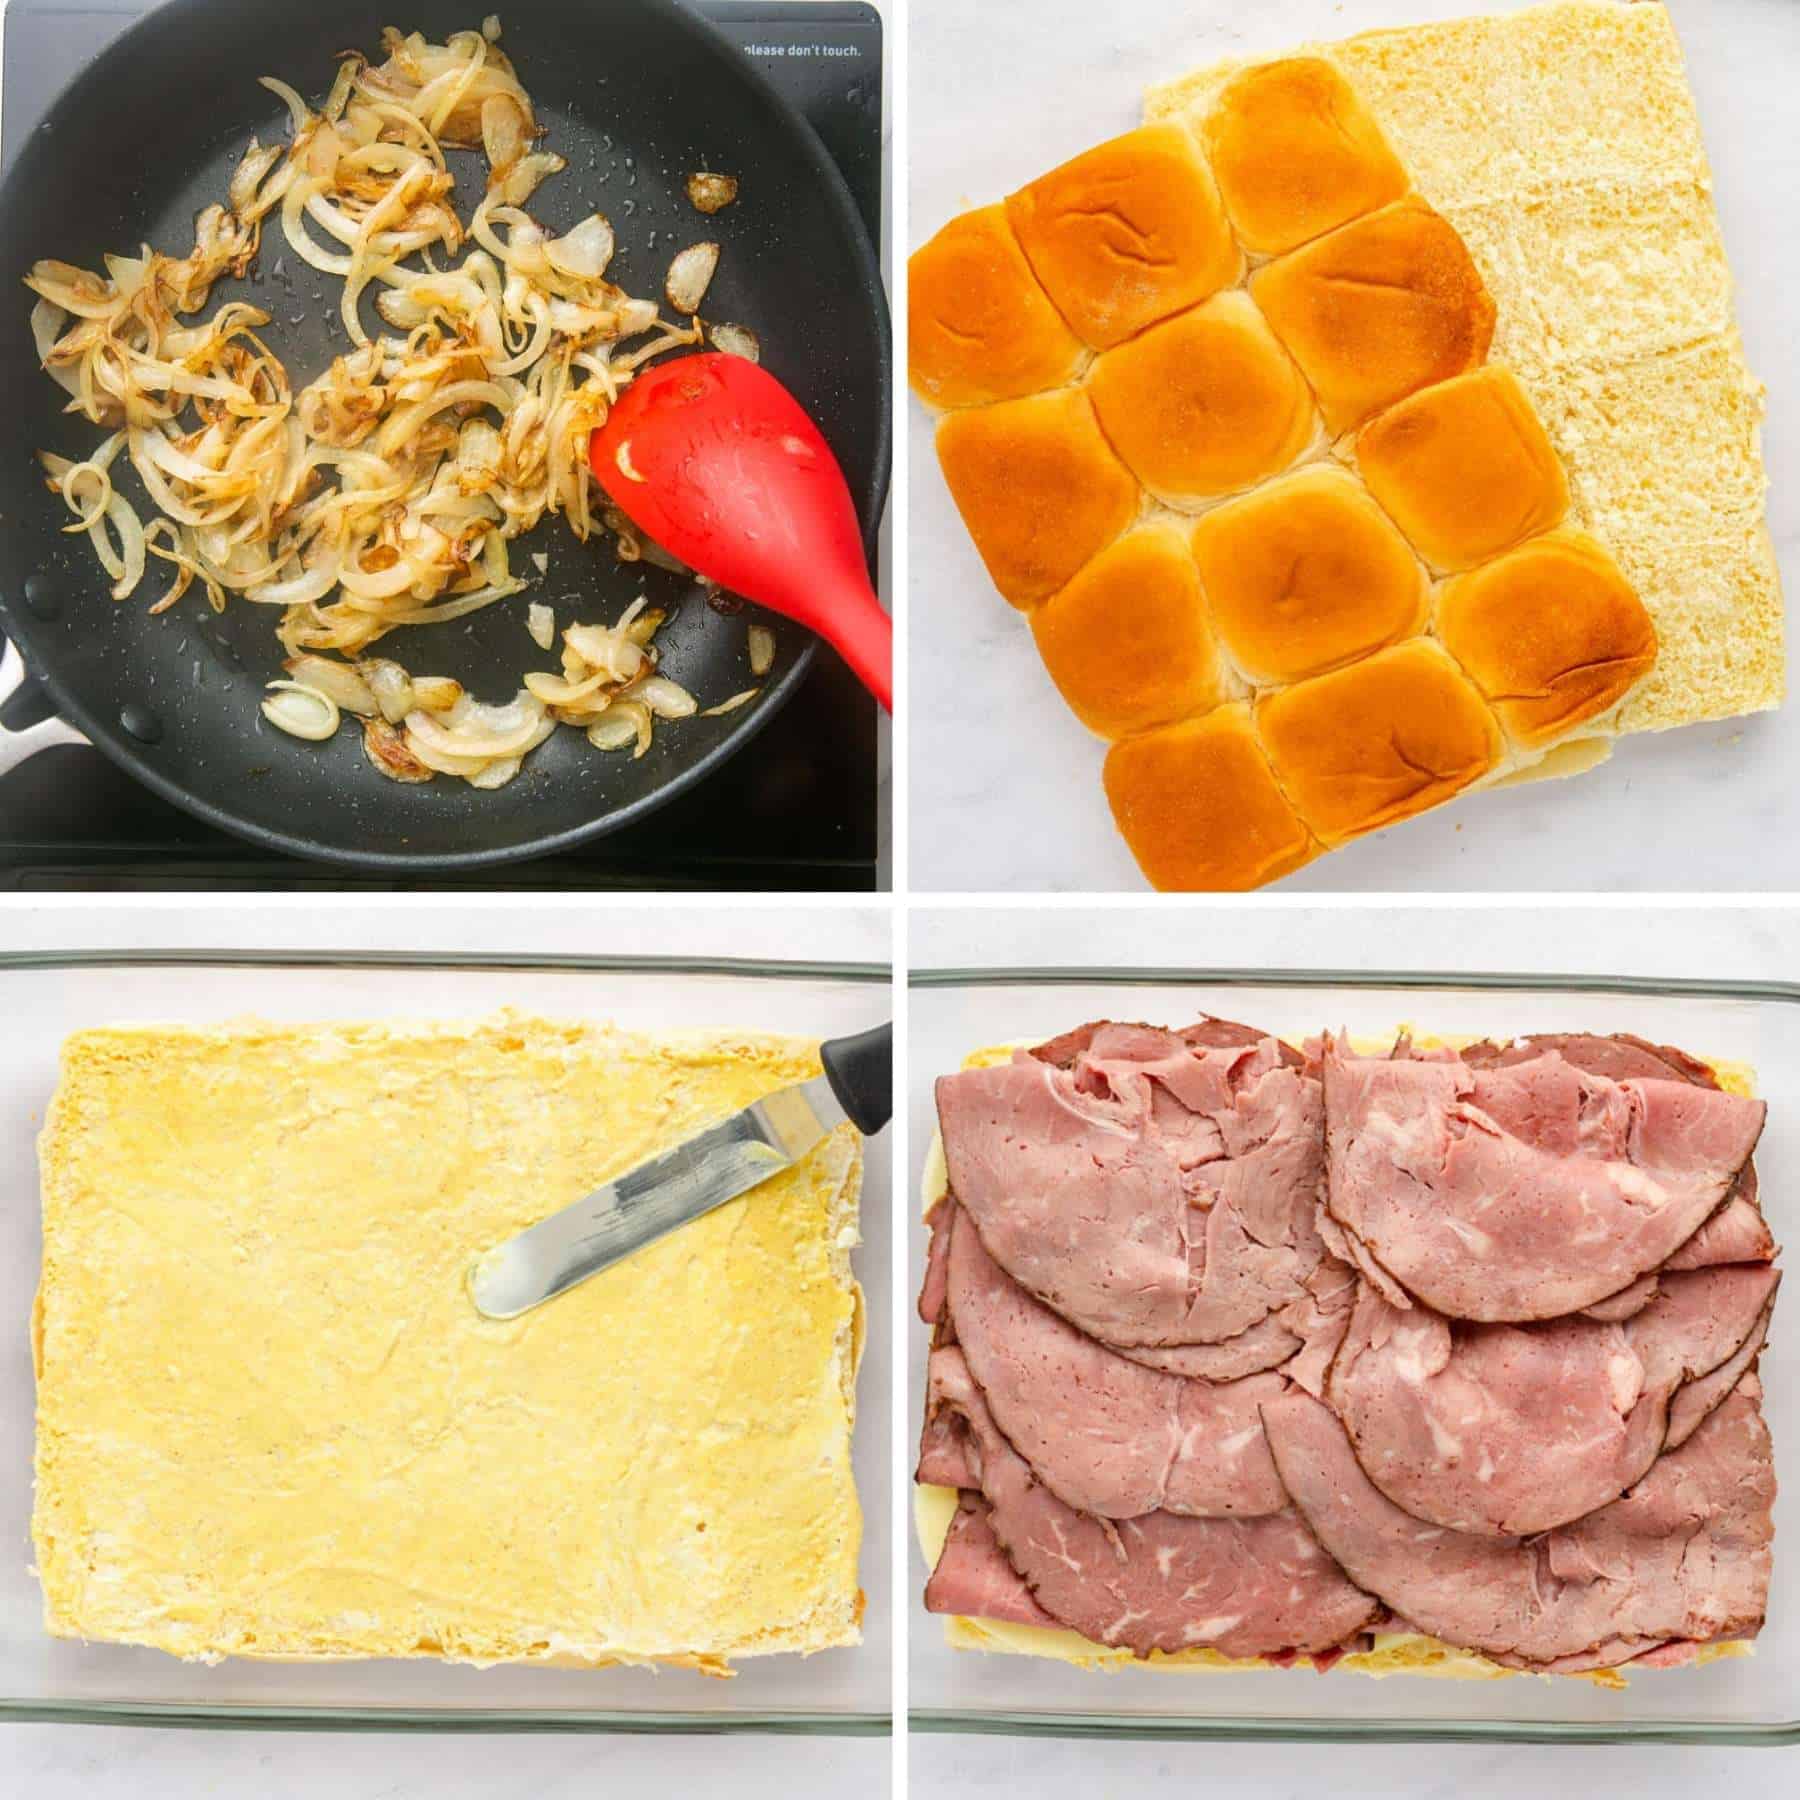 a collage of 4 images showing how to caramelize onions and layer roast beef onto hawaiian rolls